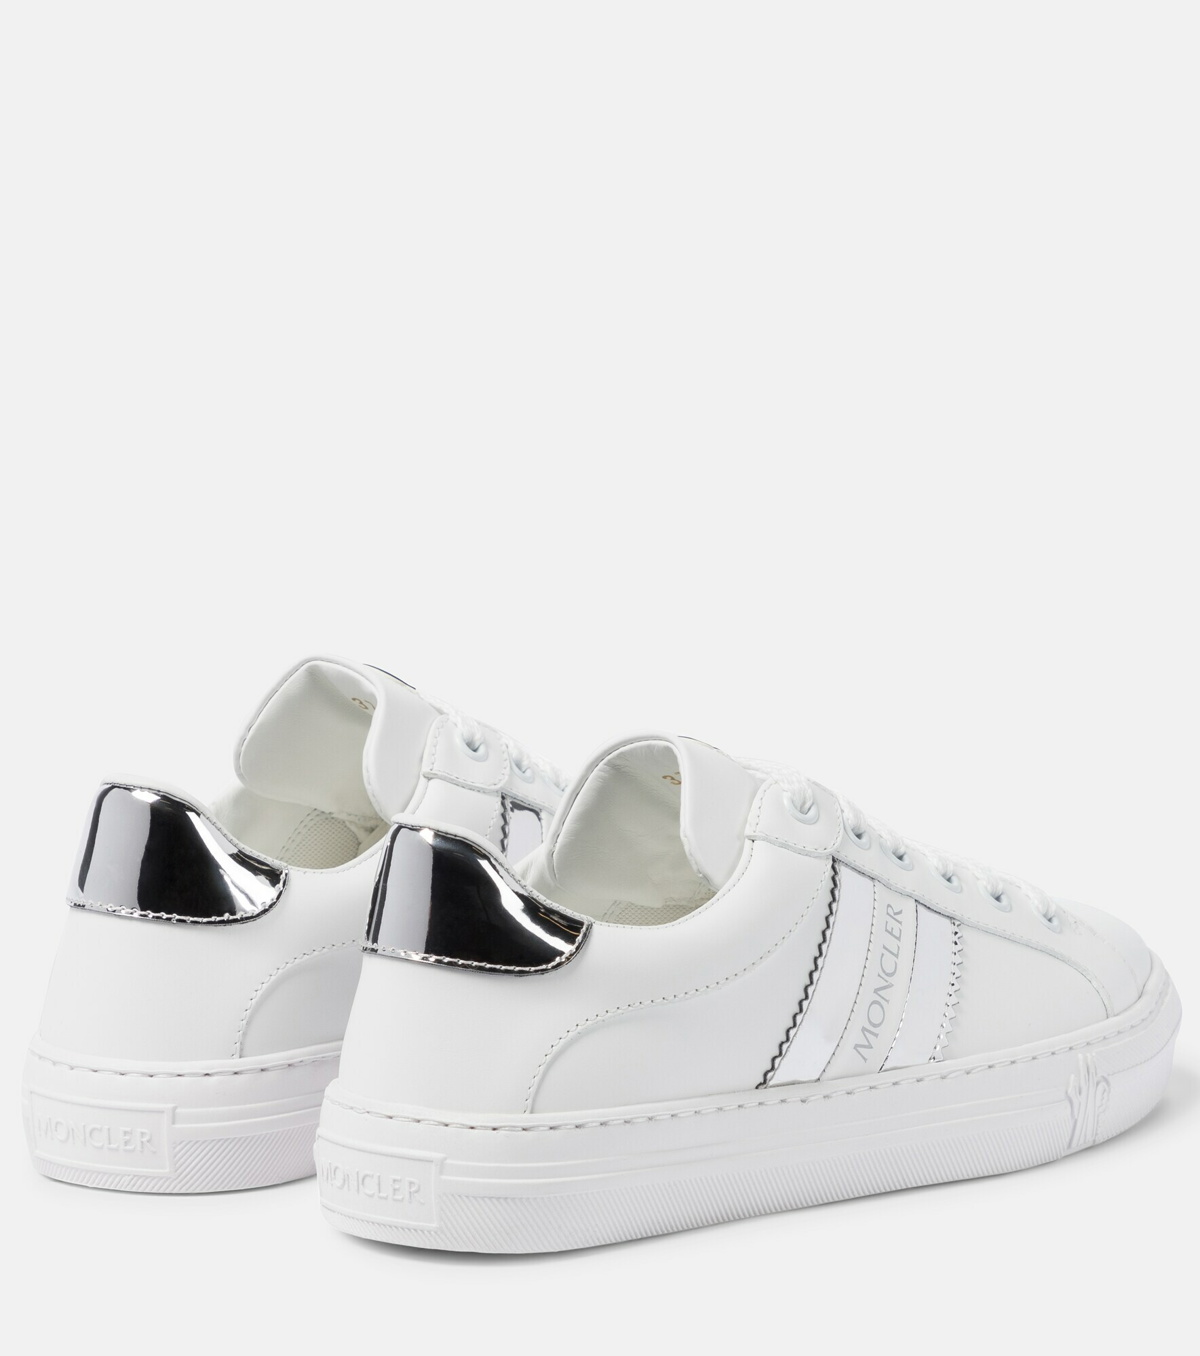 Moncler - Ariel leather sneakers Moncler